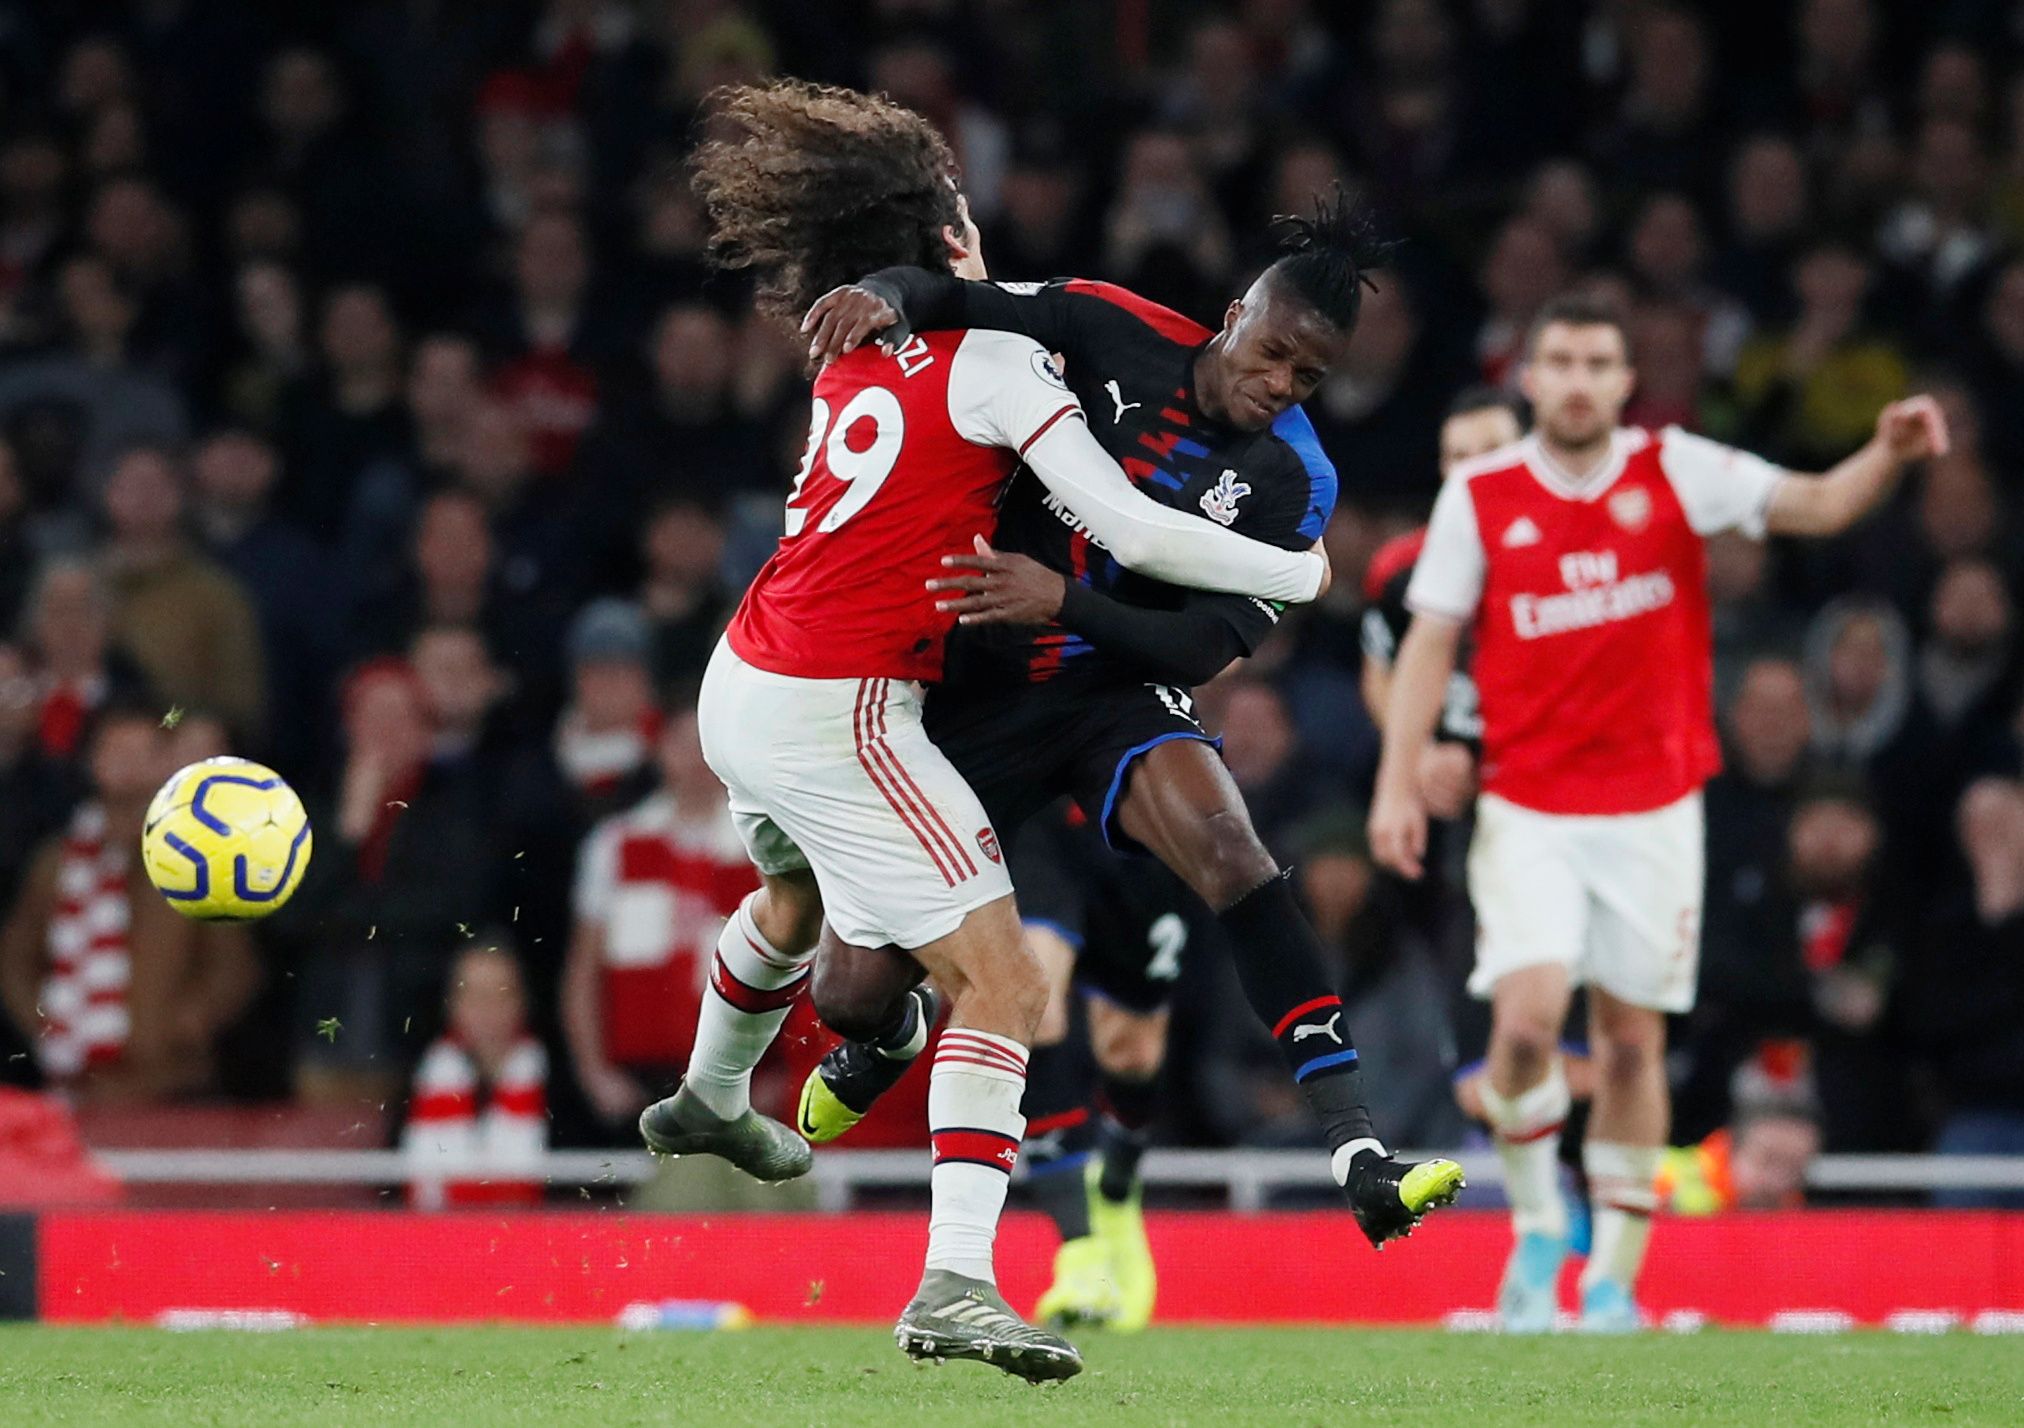 Soccer Football - Premier League - Arsenal v Crystal Palace - Emirates Stadium, London, Britain - October 27, 2019  Arsenal's Matteo Guendouzi in action with Crystal Palace's Wilfried Zaha      REUTERS/David Klein  EDITORIAL USE ONLY. No use with unauthorized audio, video, data, fixture lists, club/league logos or 